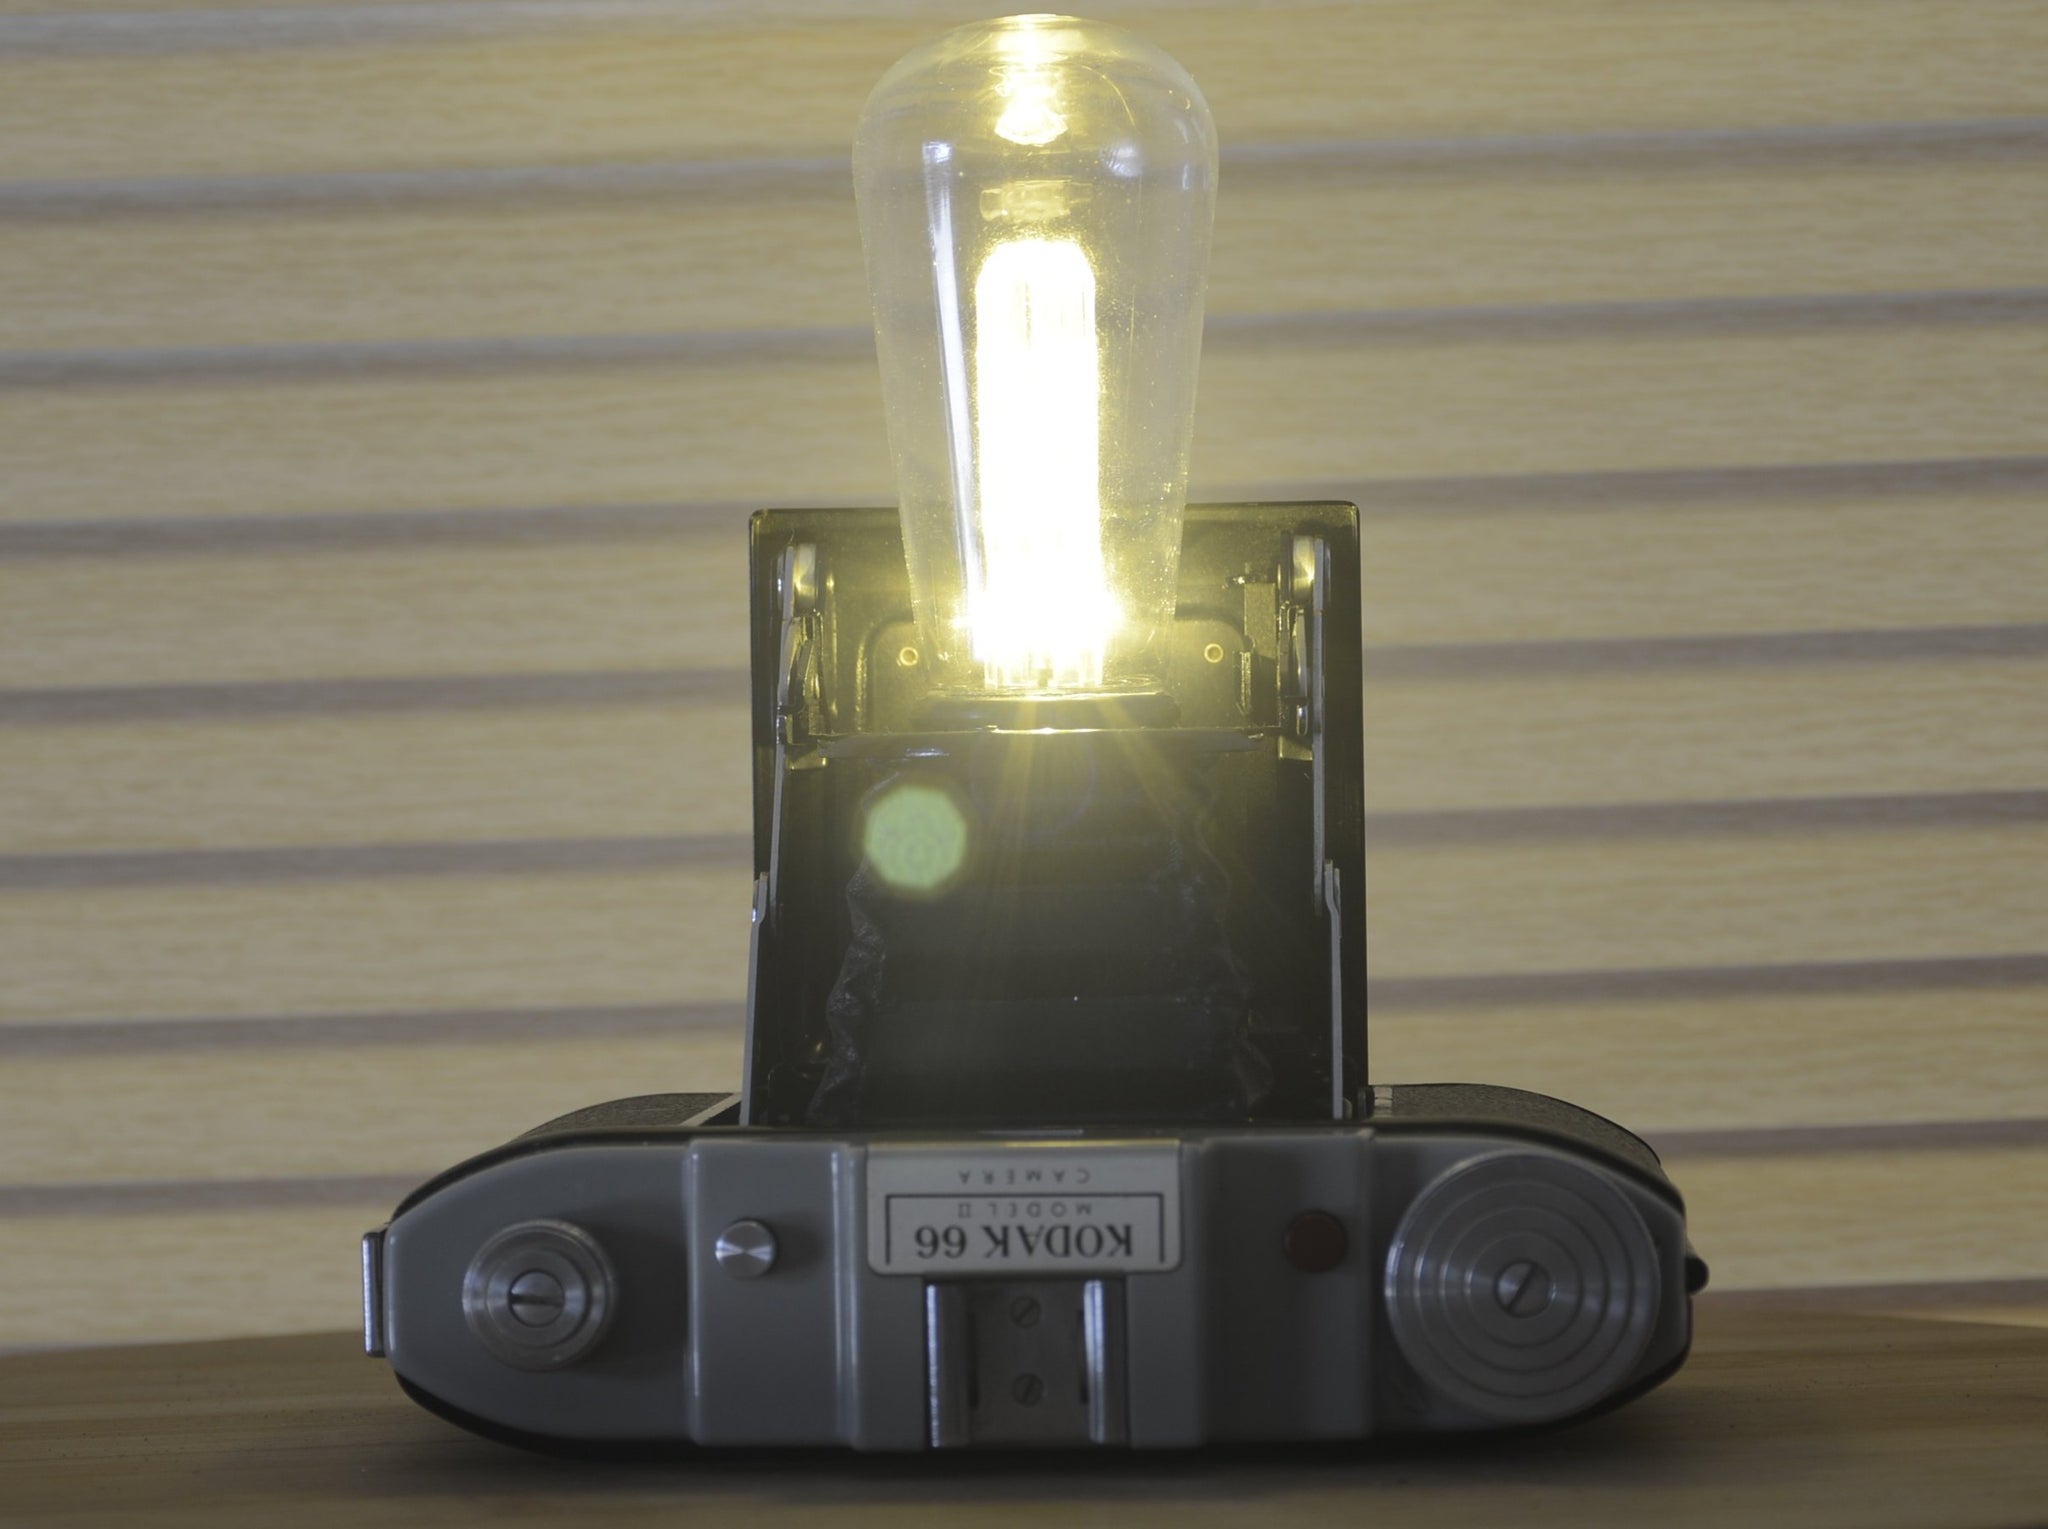 Quirky Upcycled Vintage Camera Light. Super cute, collectable Light display piece. Be the envy of all your friends - RewindCameras quality vintage cameras, fully tested and serviced